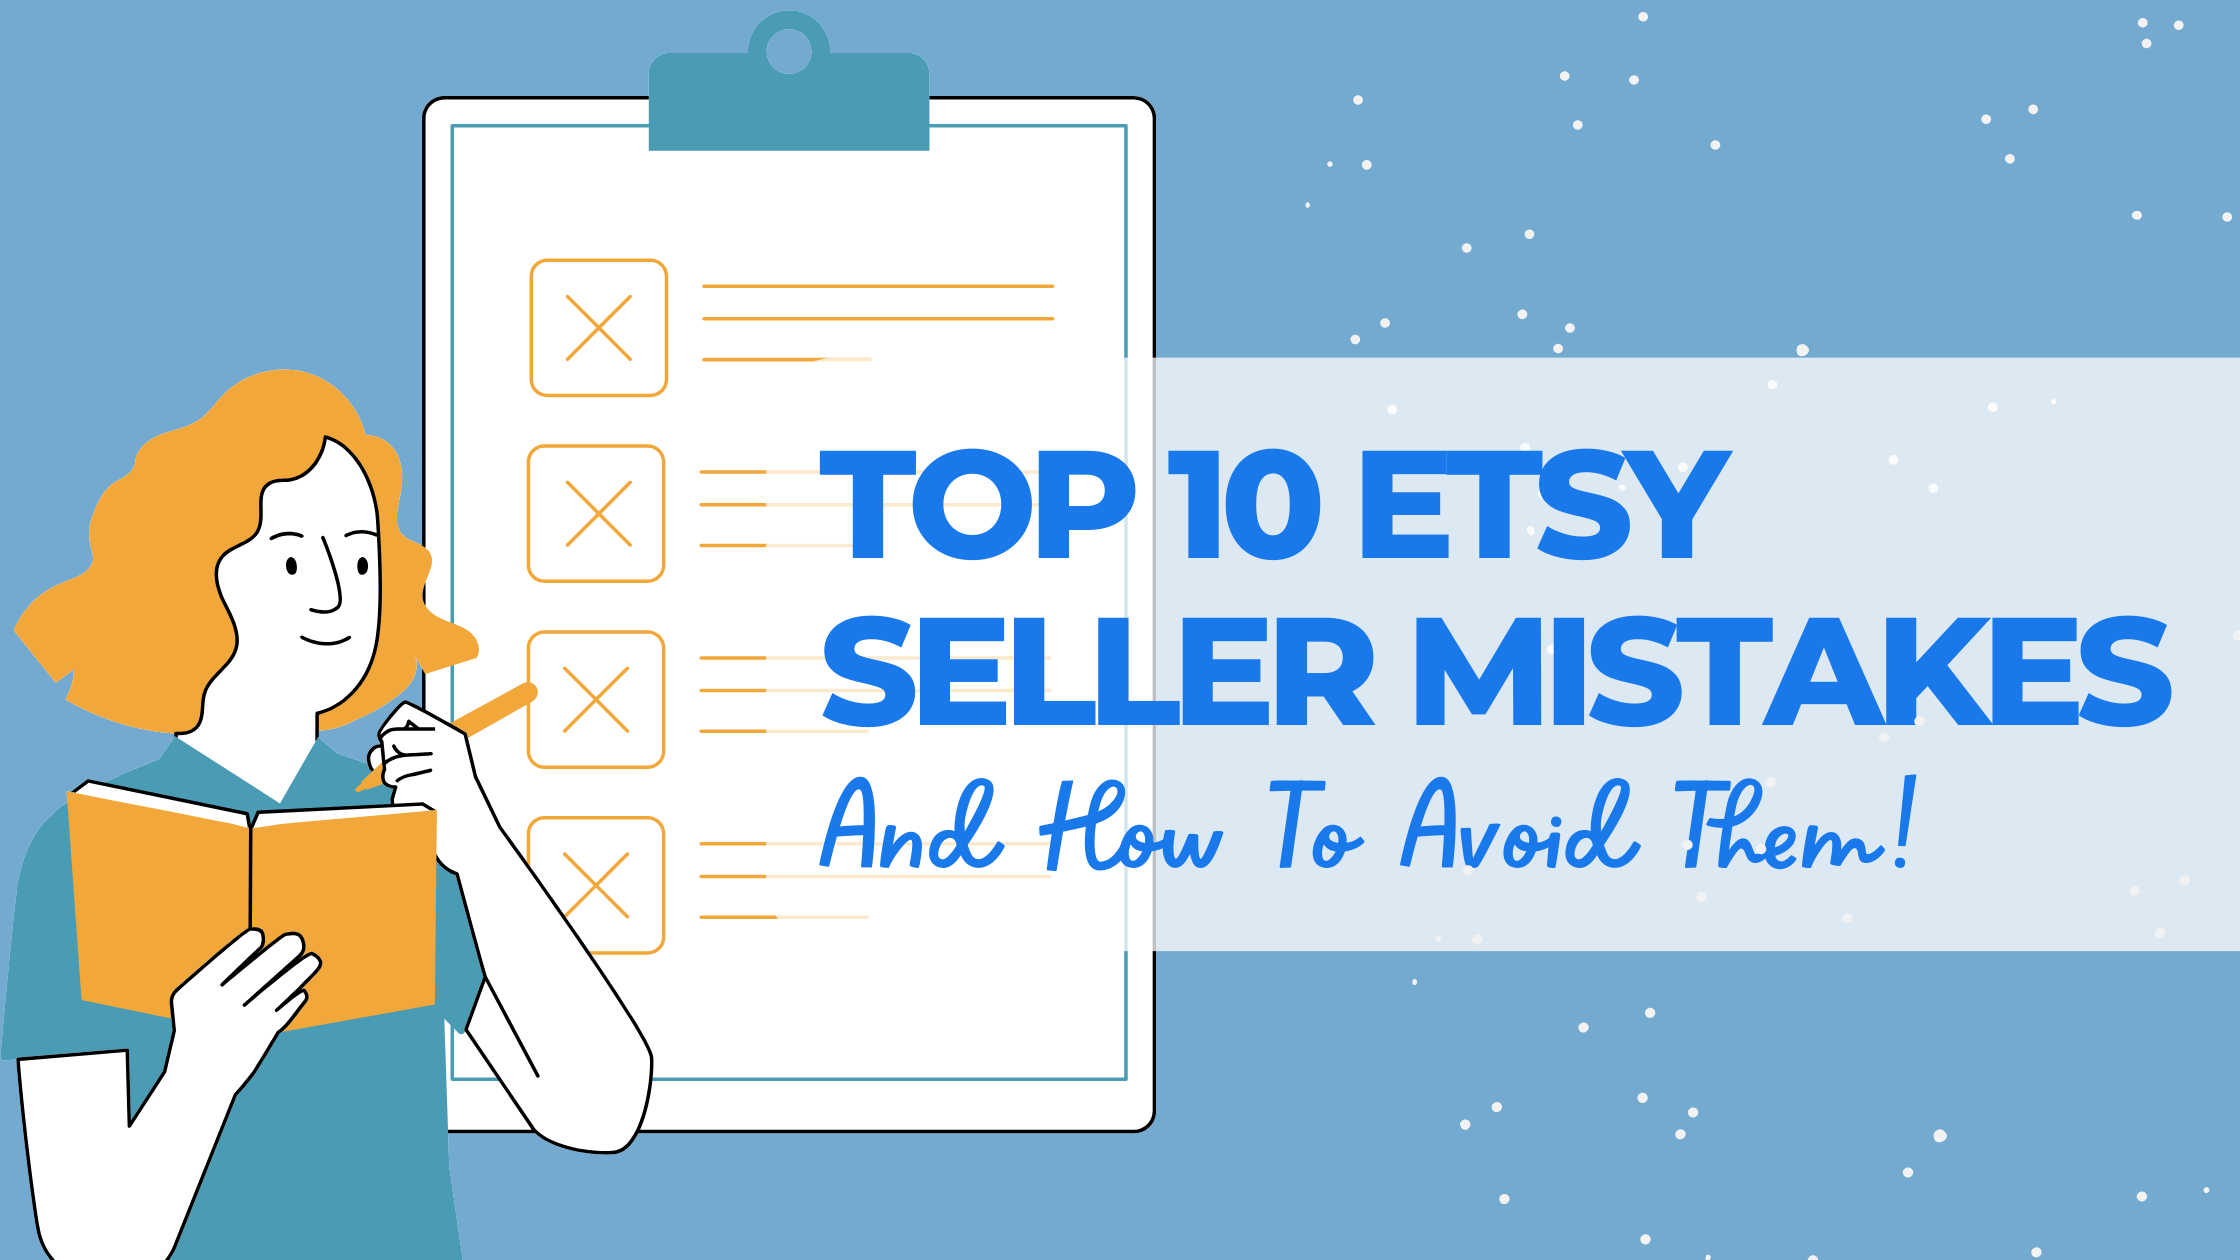 Top 10 Etsy Seller Mistakes (And How To Avoid Them!)